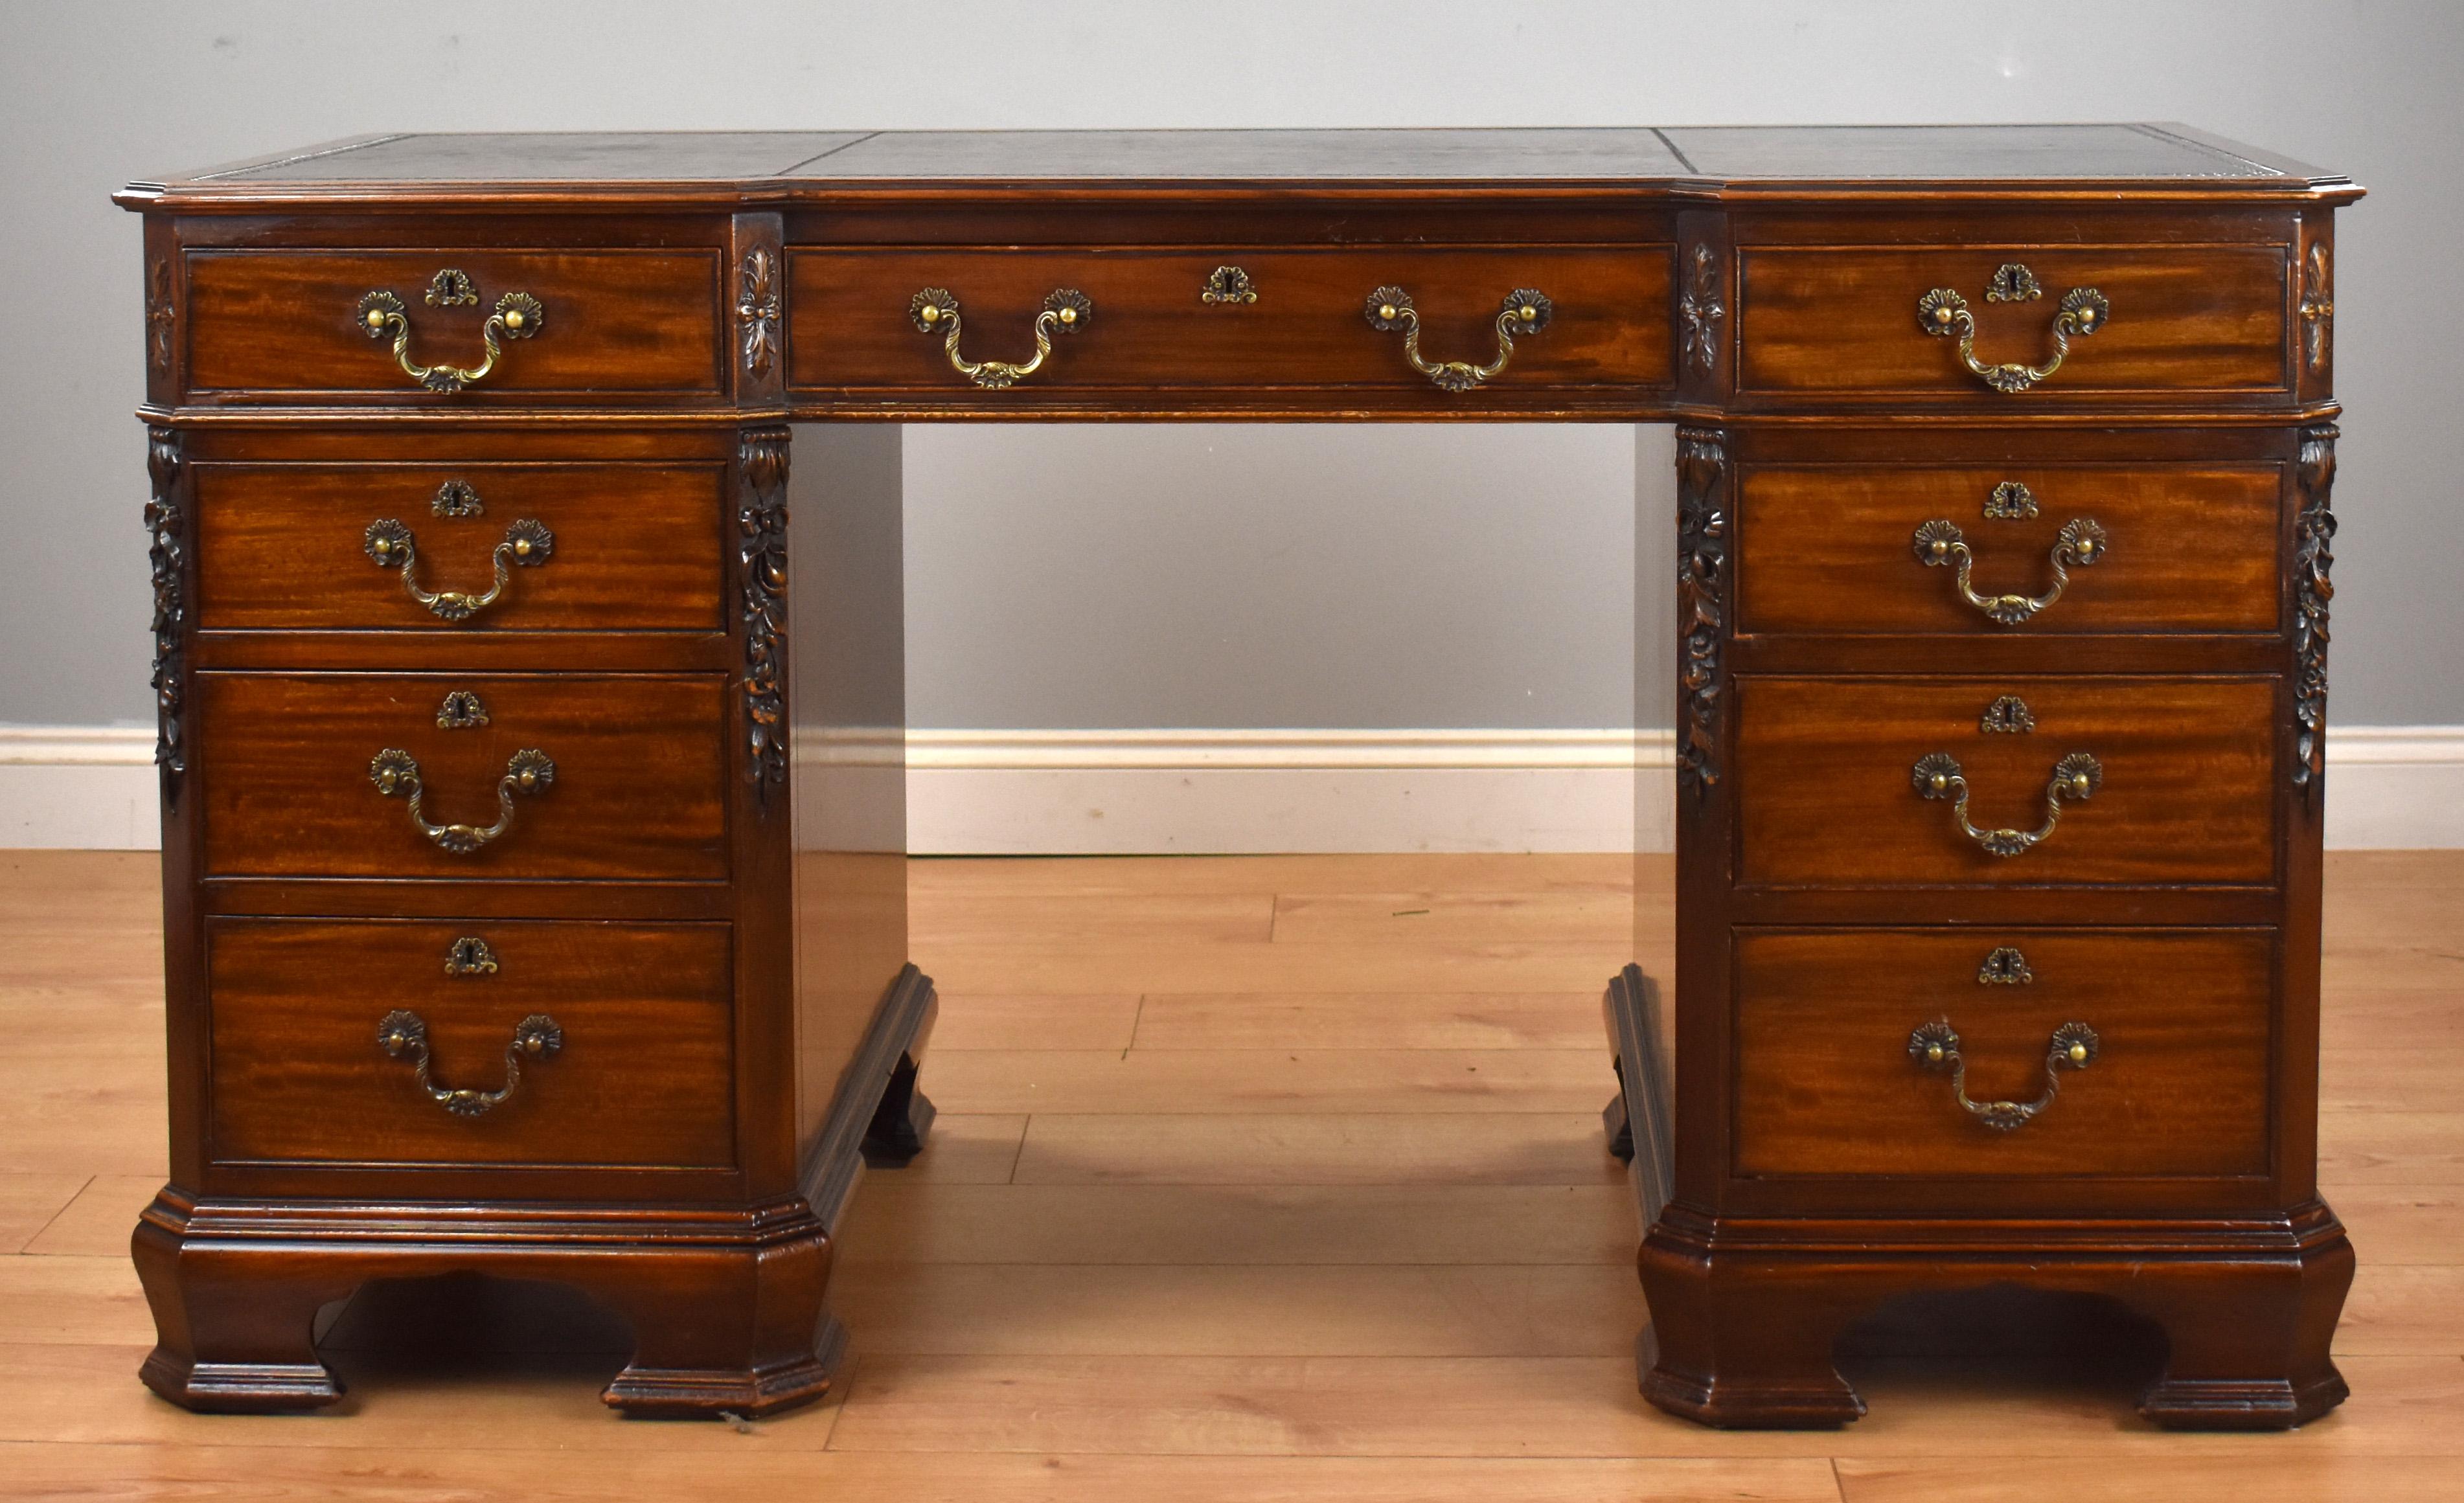 For sale is a good quality 19th century Chippendale style pedestal desk, having a brown leather insert, above three drawers in the top. The top fits onto two pedestals, each with three graduated drawers. The desk remains in very good original